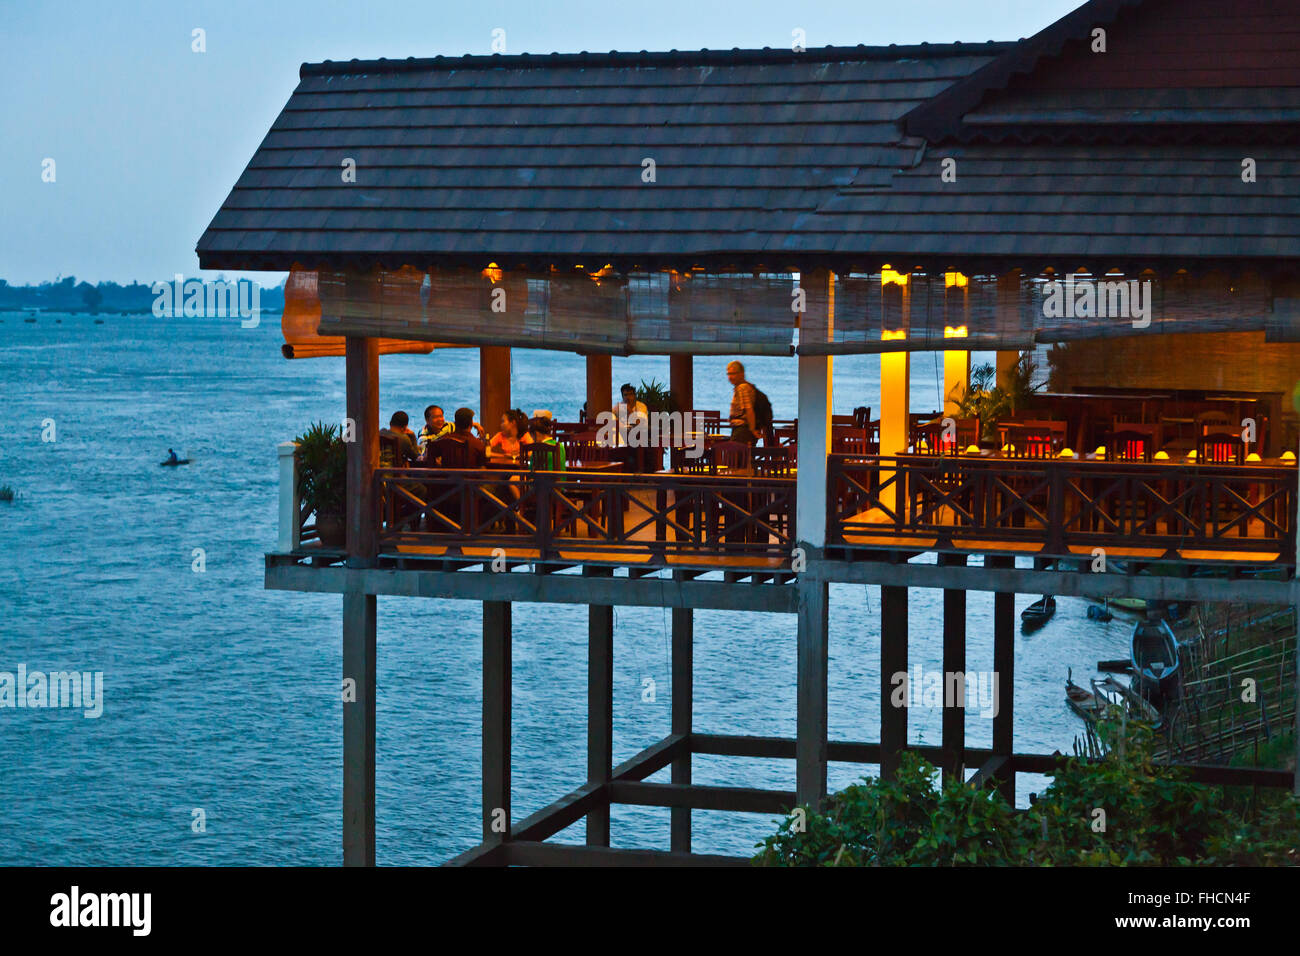 The PAN ARENA HOTEL RESTAURANT on DON KHONG ISLAND in the 10 Thousand Islands area of the Mekong River - SOUTHERN, LAOS Stock Photo